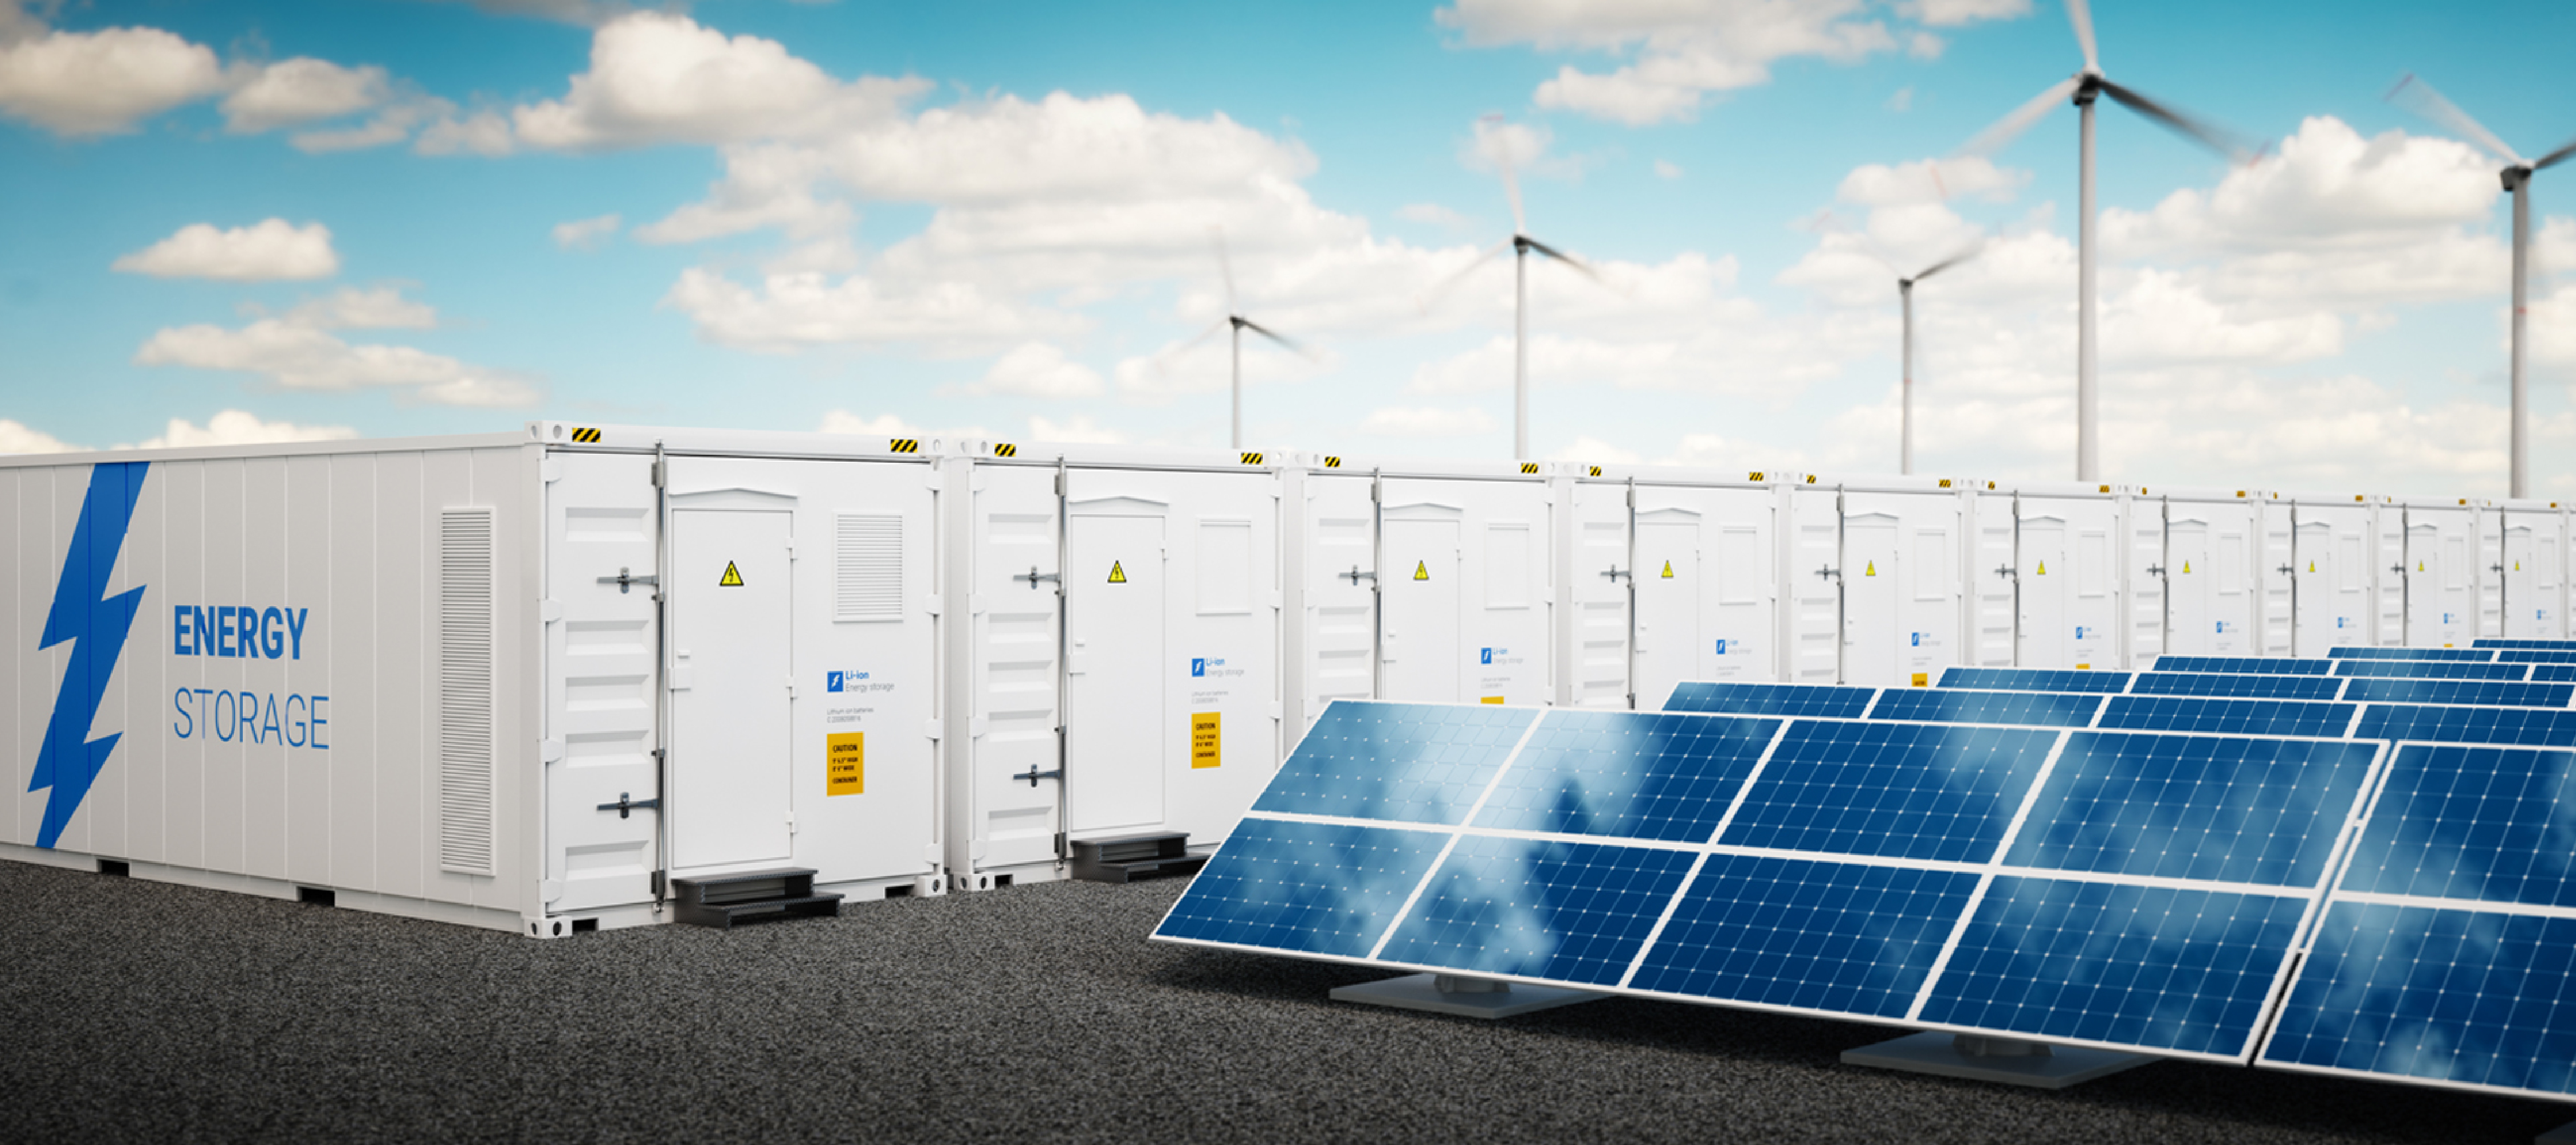 Image of solar pannels and storage containers